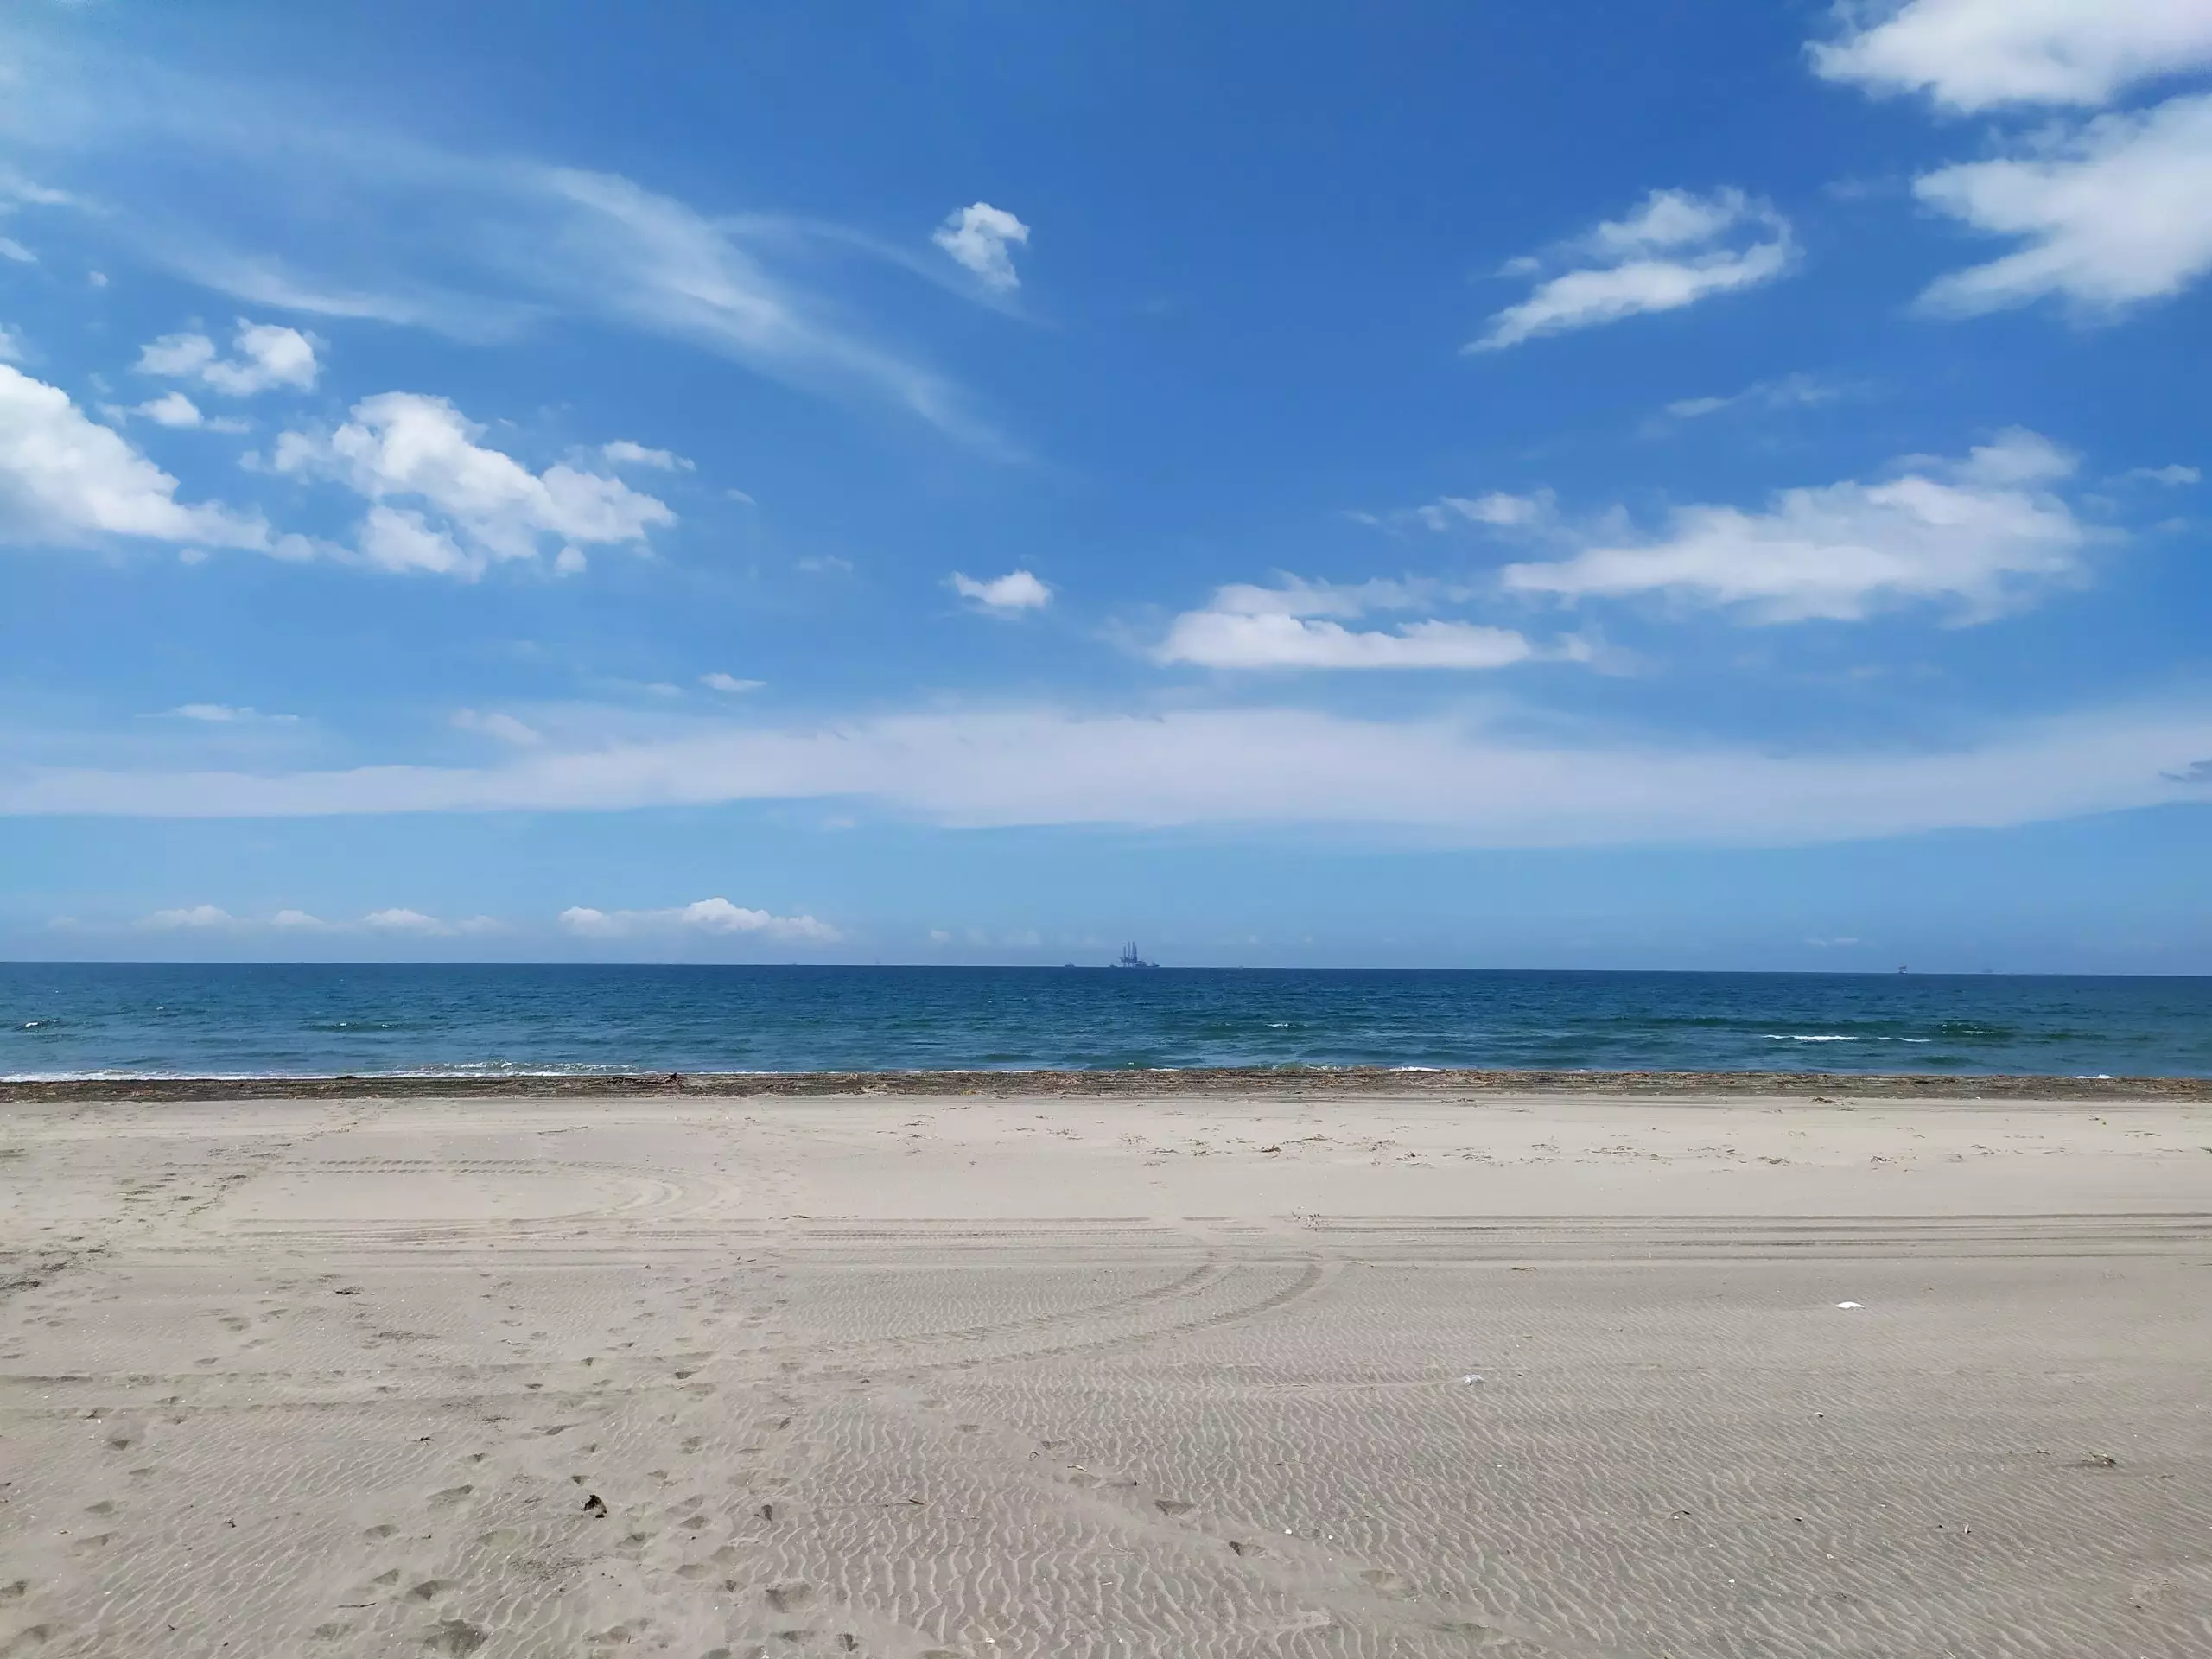 Beach property in the south of Mexico 1,000m2 opportunity 95,000usd